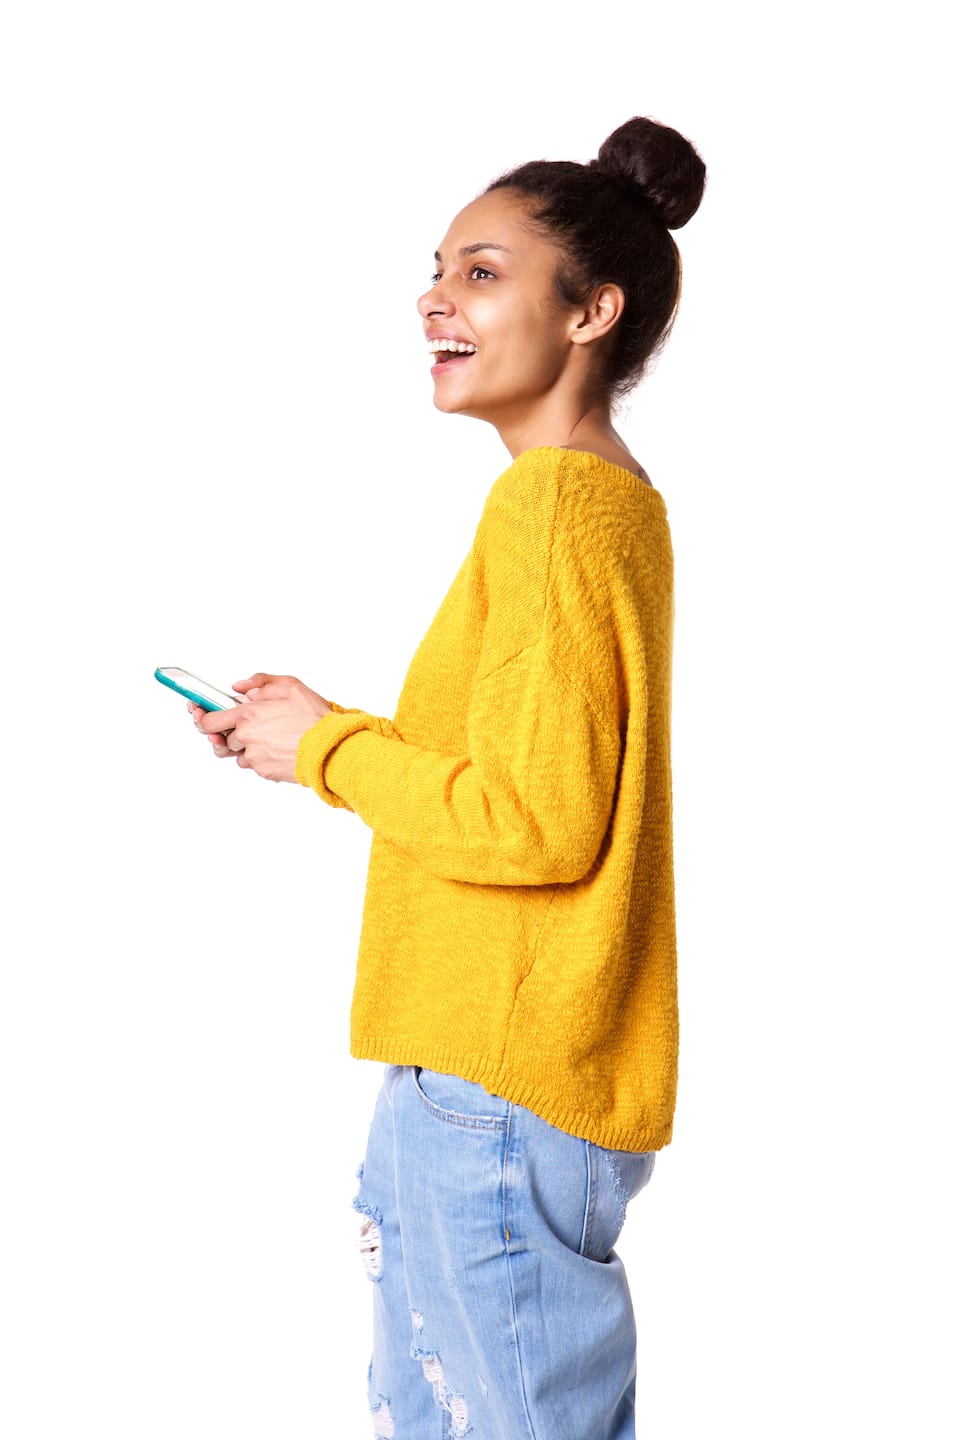 cheerful-young-woman-with-mobile-P3UPRYZ